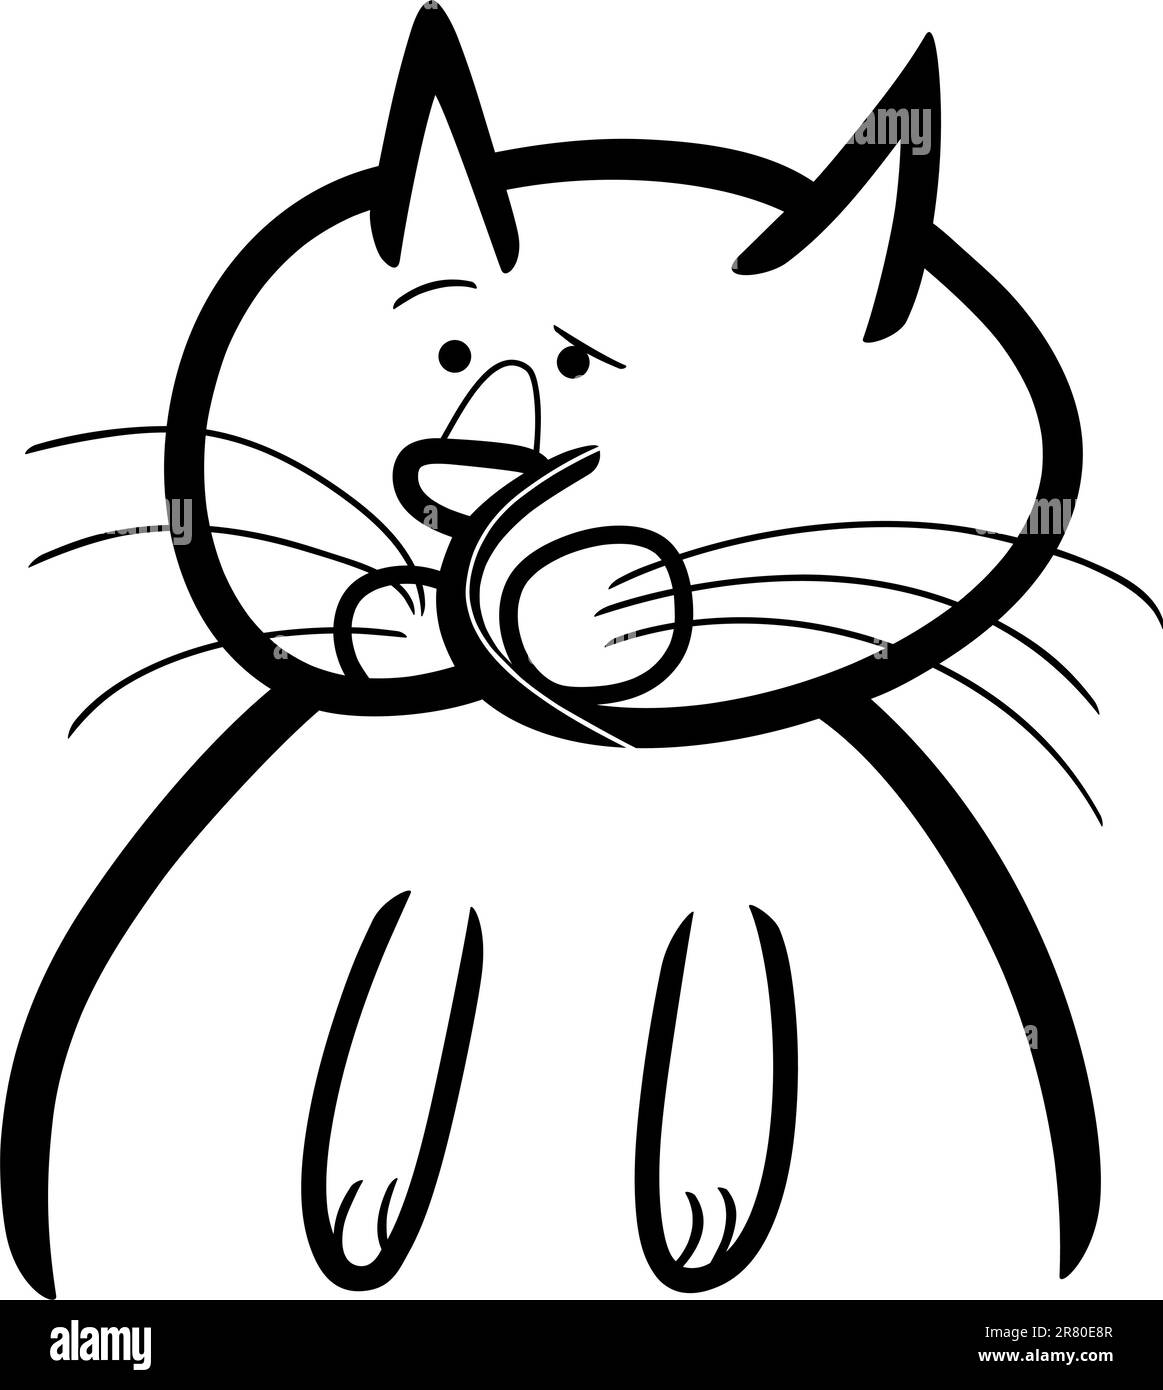 cartoon doodle illustration of cat or kitten for coloring book Stock Vector